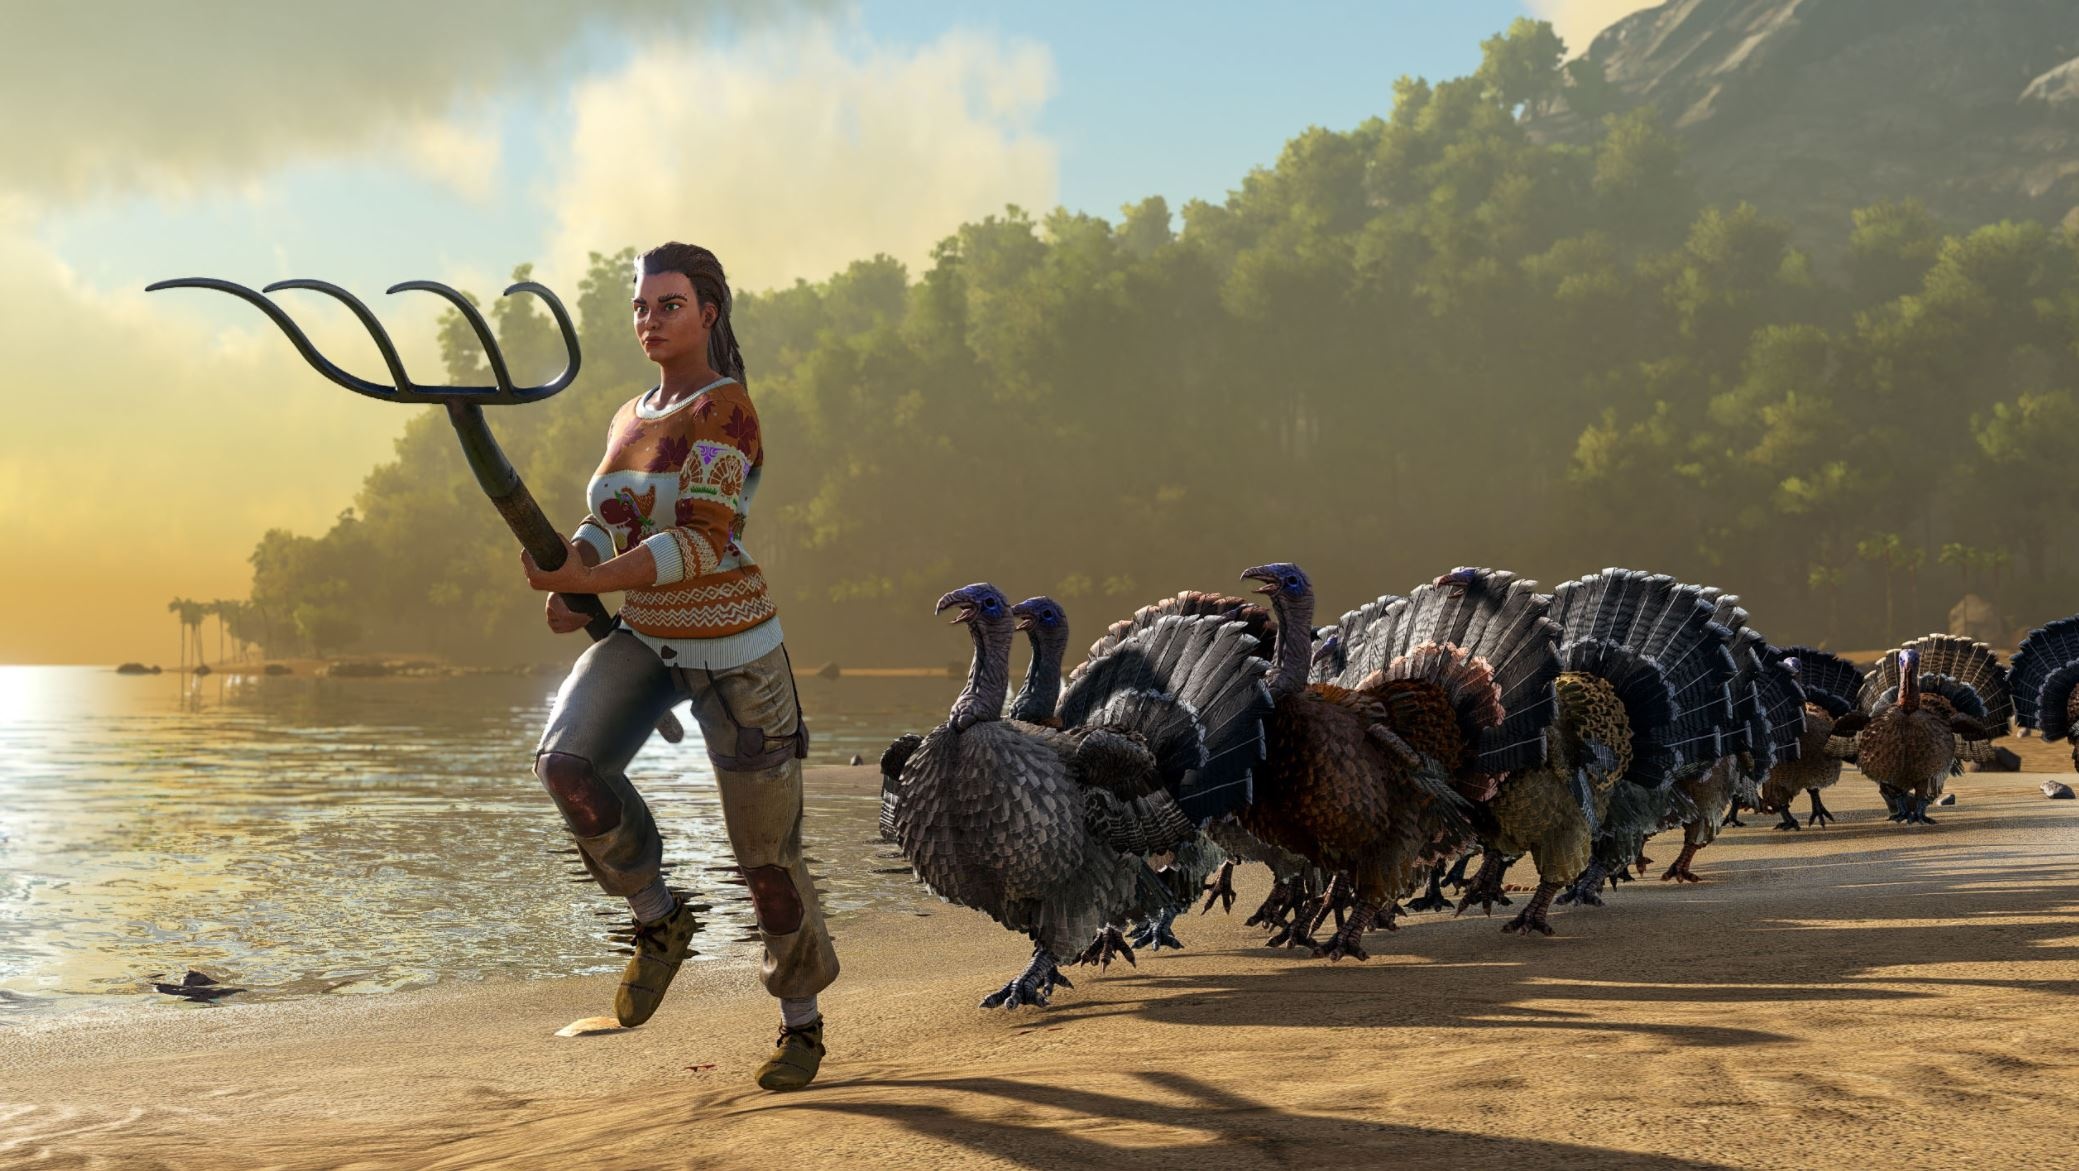 ARK: Survival Evolved: 2017 action-adventure game, powered by Unreal Engine 4. 2080x1180 HD Wallpaper.